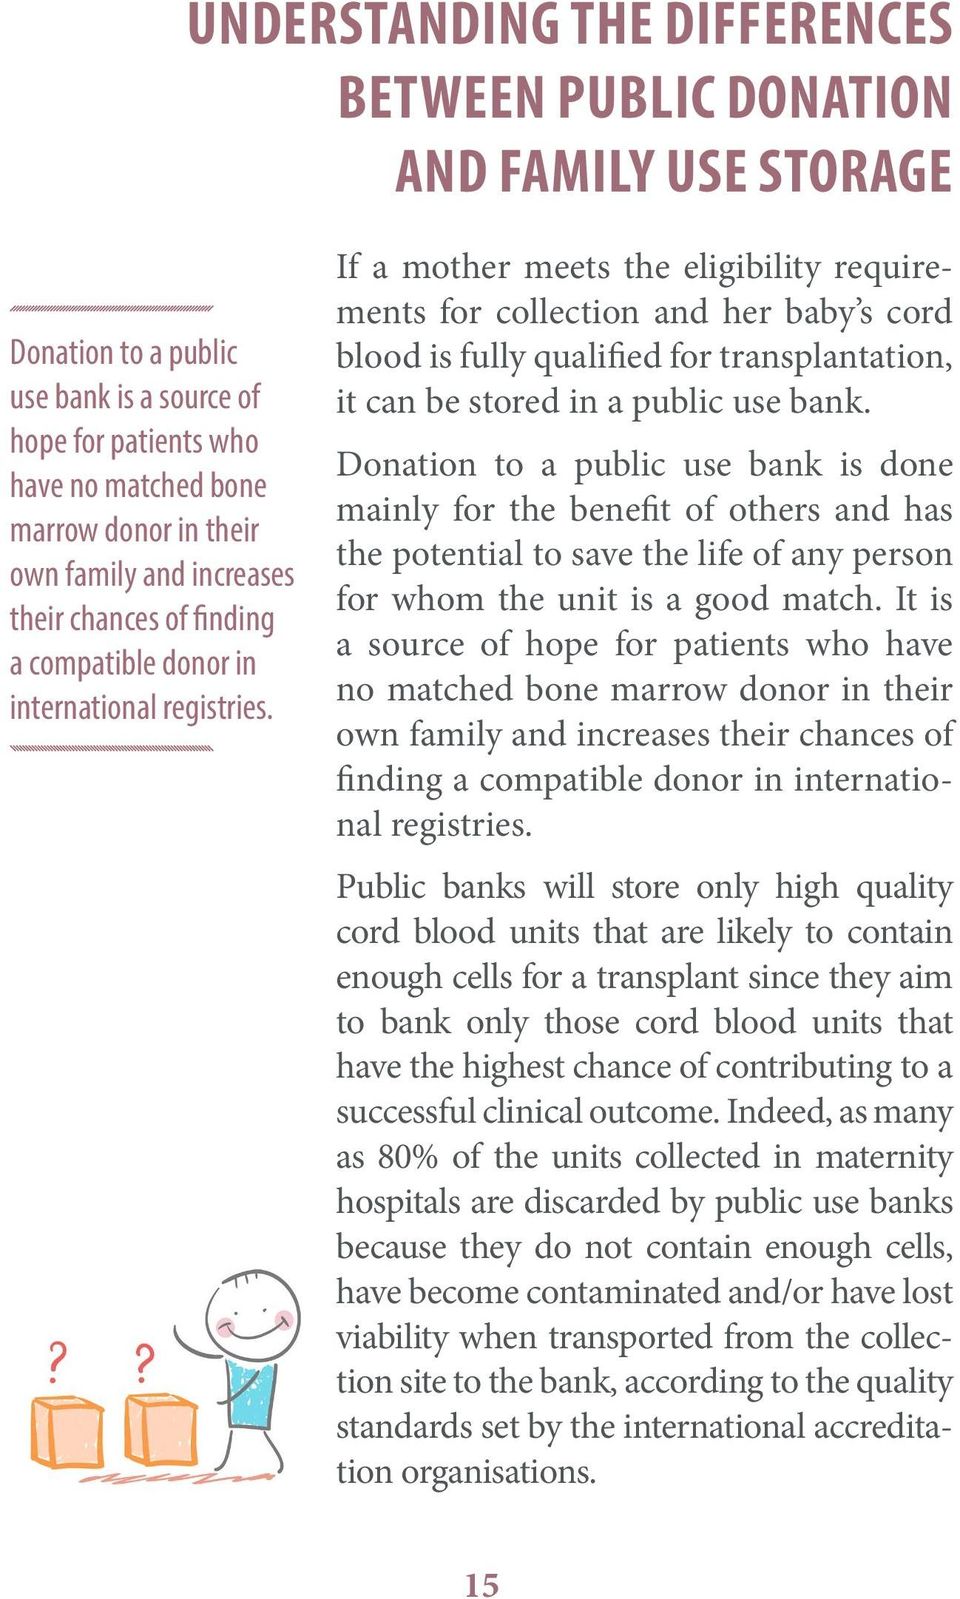 If a mother meets the eligibility requirements for collection and her baby s cord blood is fully qualified for transplantation, it can be stored in a public use bank.